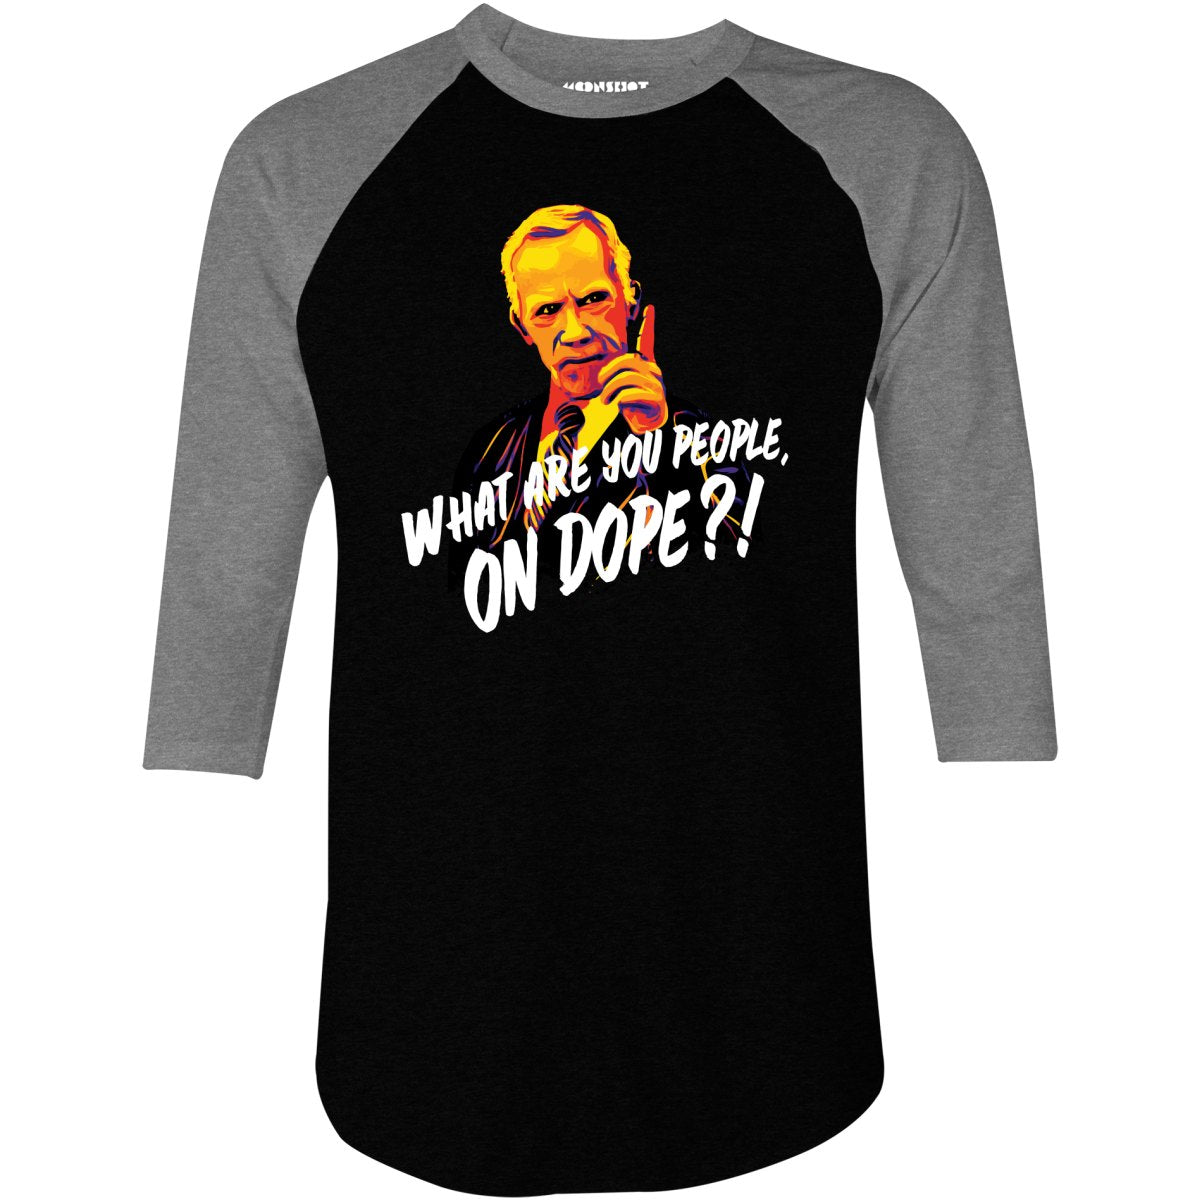 Mr. Hand - What Are You People, On Dope? - 3/4 Sleeve Raglan T-Shirt